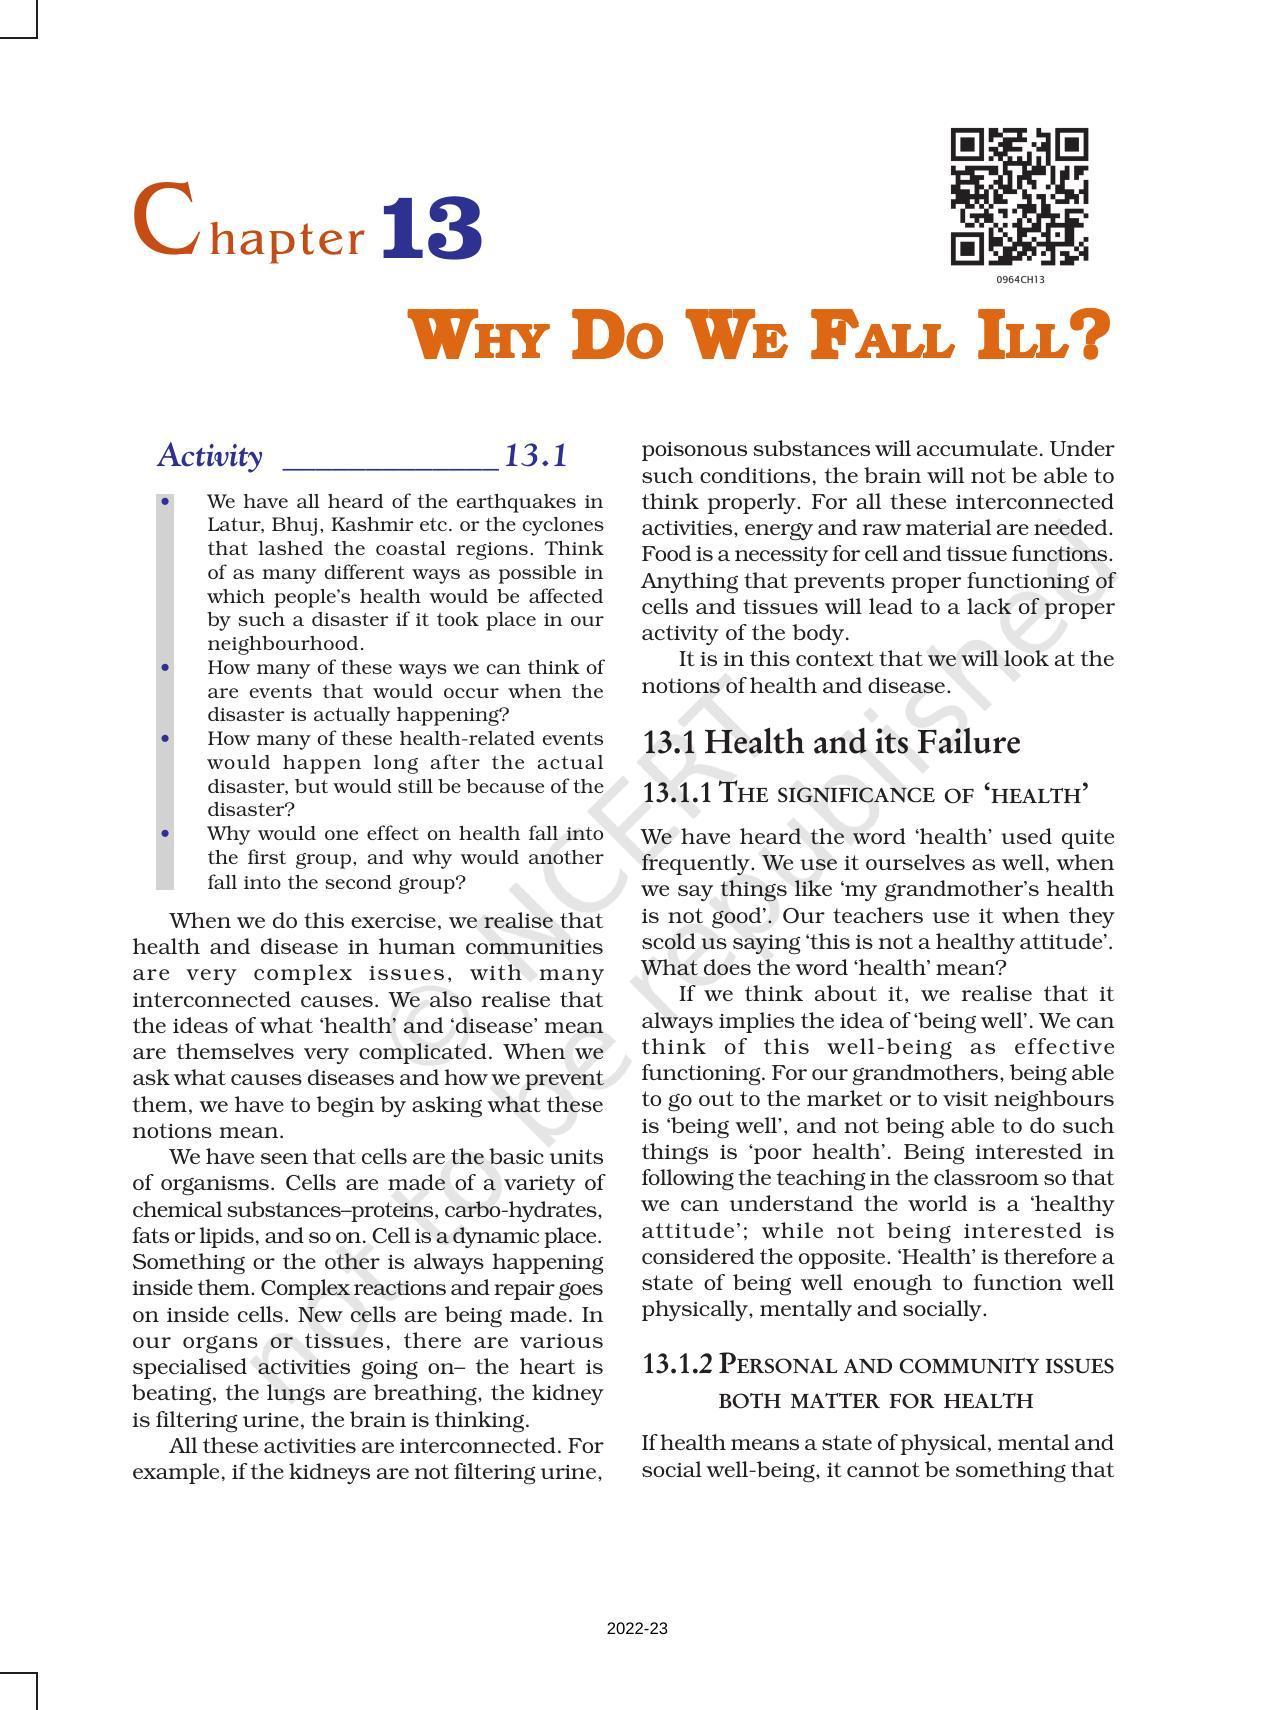 NCERT Book for Class 9 Science Chapter 13 Why Do We Fall ill - Page 1